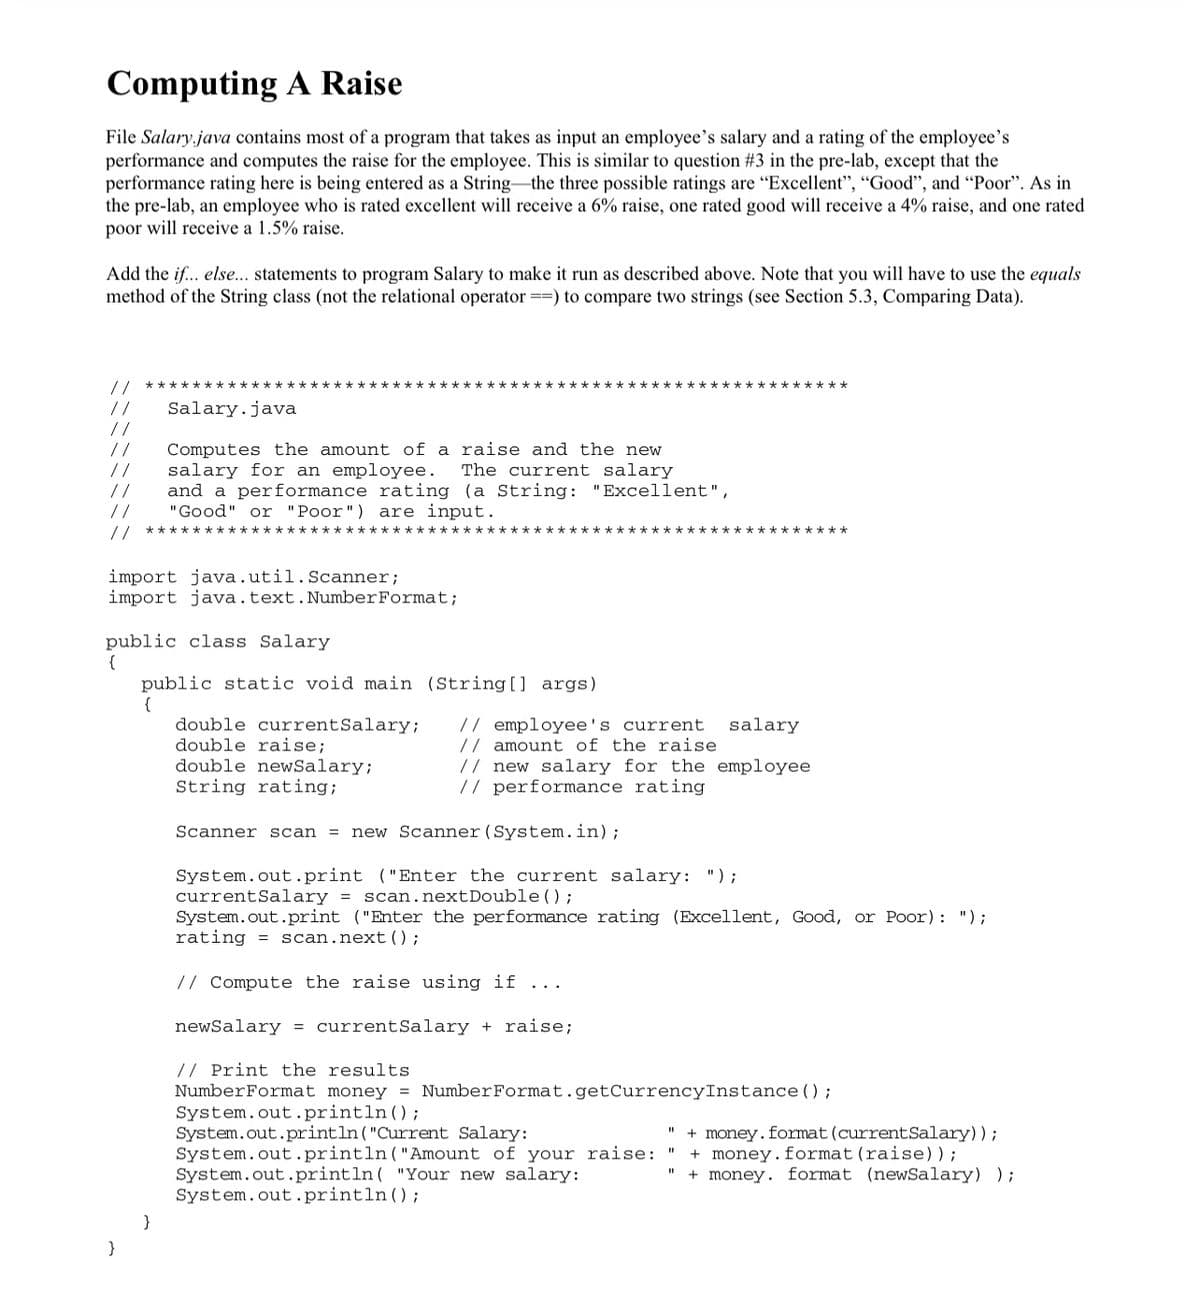 Computing A Raise
File Salary.java contains most of a program that takes as input an employee's salary and a rating of the employee's
performance and computes the raise for the employee. This is similar to question #3 in the pre-lab, except that the
performance rating here is being entered as a String–the three possible ratings are "Excellent", "Good", and "Poor". As in
the pre-lab, an employee who is rated excellent will receive a 6% raise, one rated good will receive a 4% raise, and one rated
poor will receive a 1.5% raise.
Add the if... else... statements to program Salary to make it run as described above. Note that you will have to use the equals
method of the String class (not the relational operator ==) to compare two strings (see Section 5.3, Comparing Data).
// *****************
***********
**** **************
//
//
//
//
//
//
Salary.java
Computes the amount of a raise and the new
salary for an employee.
and a performance rating (a String: "Excellent",
"Good" or "Poor") are input.
The current salary
//
***********:
****************
********
import java.util.Scanner;
import java.text.NumberFormat;
public class Salary
{
public static void main (String[] args)
{
double currentSalary;
double raise;
double newSalary;
String rating;
// employee's current
// amount of the raise
// new salary for the employee
// performance rating
salary
Scanner scan = new Scanner(System.in);
System.out.print ("Enter the current salary: ");
currentSalary = scan.nextDouble() ;
System.out.print ("Enter the performance rating (Excellent, Good, or Poor): ");
rating =
scan.next();
// Compute the raise using if ...
newSalary = currentSalary + raise;
// Print the results
NumberFormat money = NumberFormat.getCurrencyInstance () ;
System.out.println();
System.out.println("Current Salary:
System.out.println("Amount of your raise:
System.out.println( "Your new salary:
System.out.println(;
+ money.format (currentSalary));
+ money.format(raise));
+ money. format (newSalary) );
%3D
}
}
